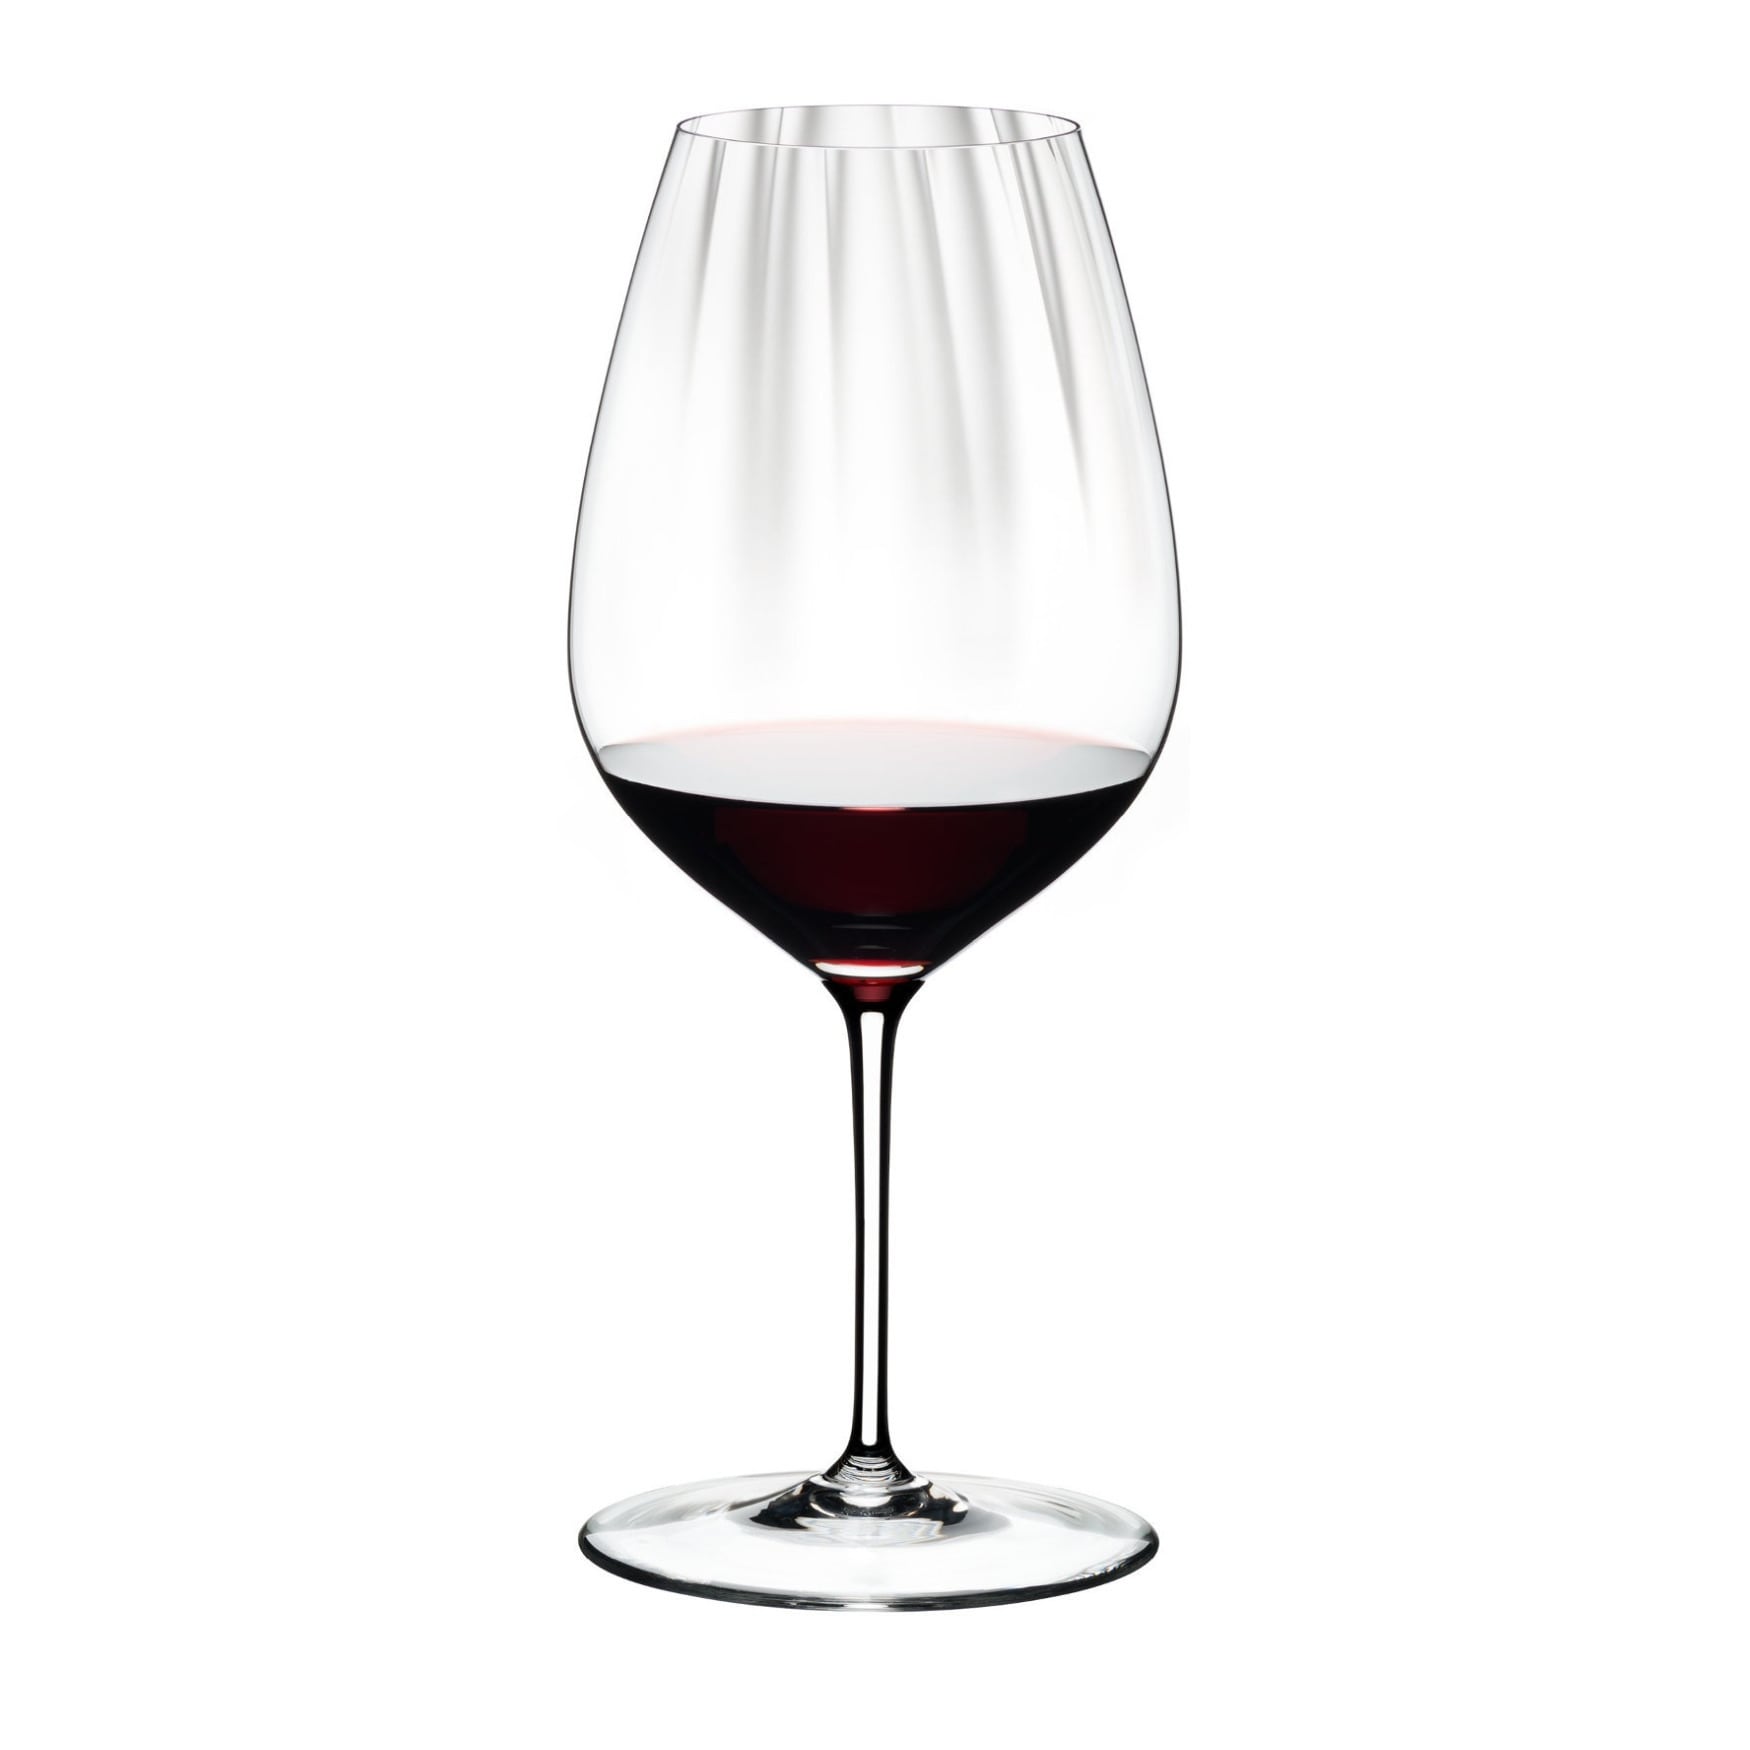 https://ak1.ostkcdn.com/images/products/is/images/direct/31c48867ca6a539a36bfd1fd8dc8a6f737fafbf2/Riedel-Performance-Wine-Glasses-%284-Pack%29-with-Wine-Aerator-Bundle.jpg